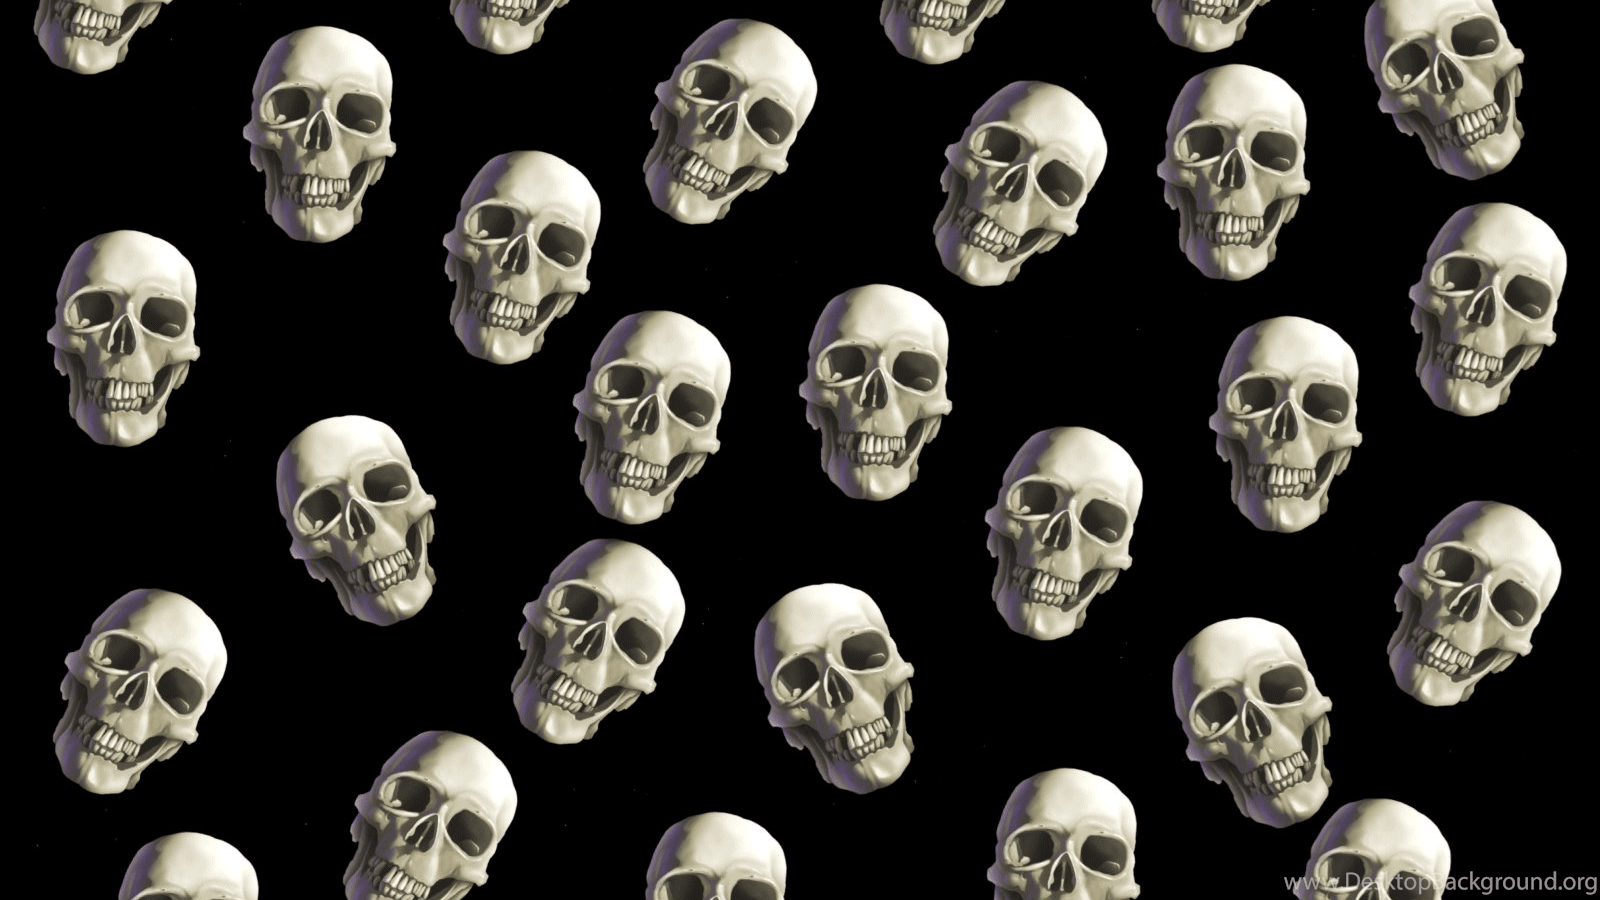 Other Wallpaper: Cute Skeleton Wallpaper Free HD Quality